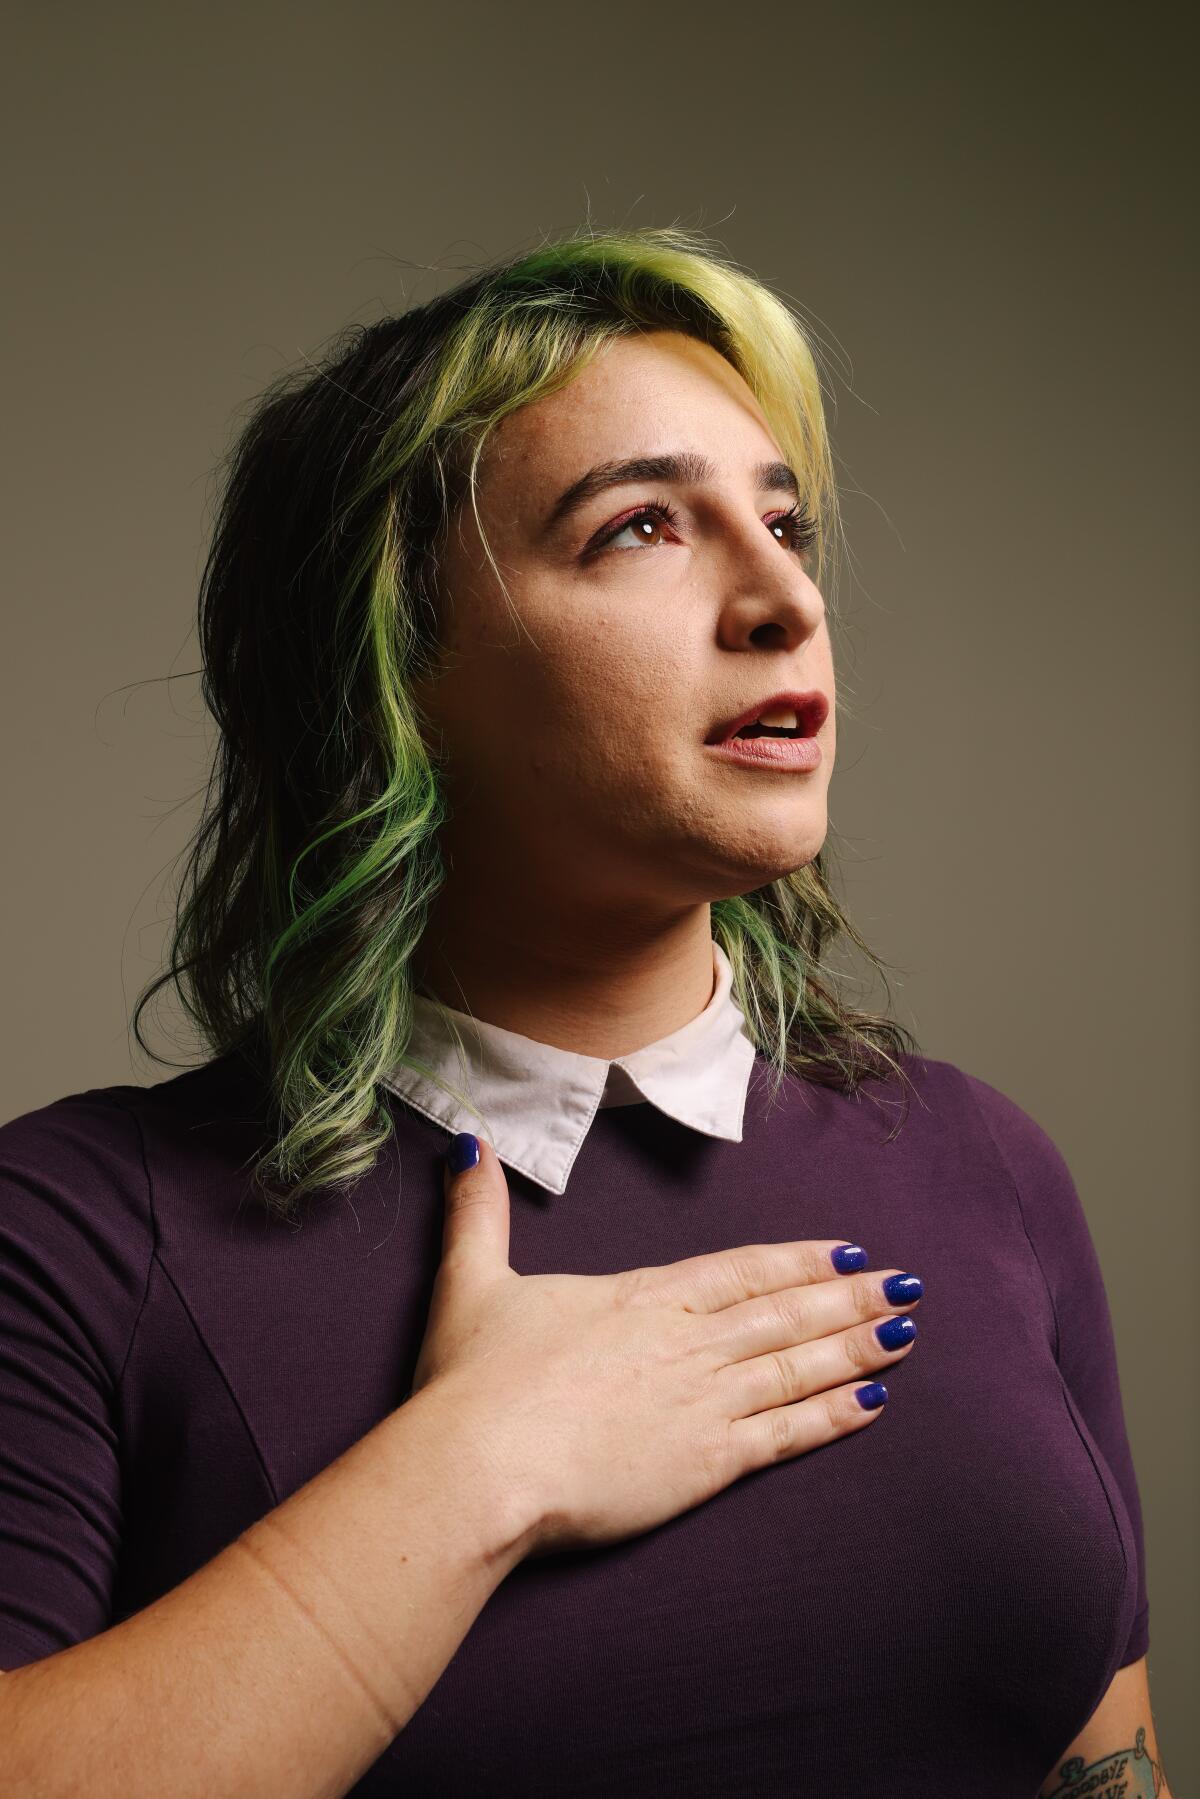 A woman with green hair and a purple shirt poses with her right hand on her chest 